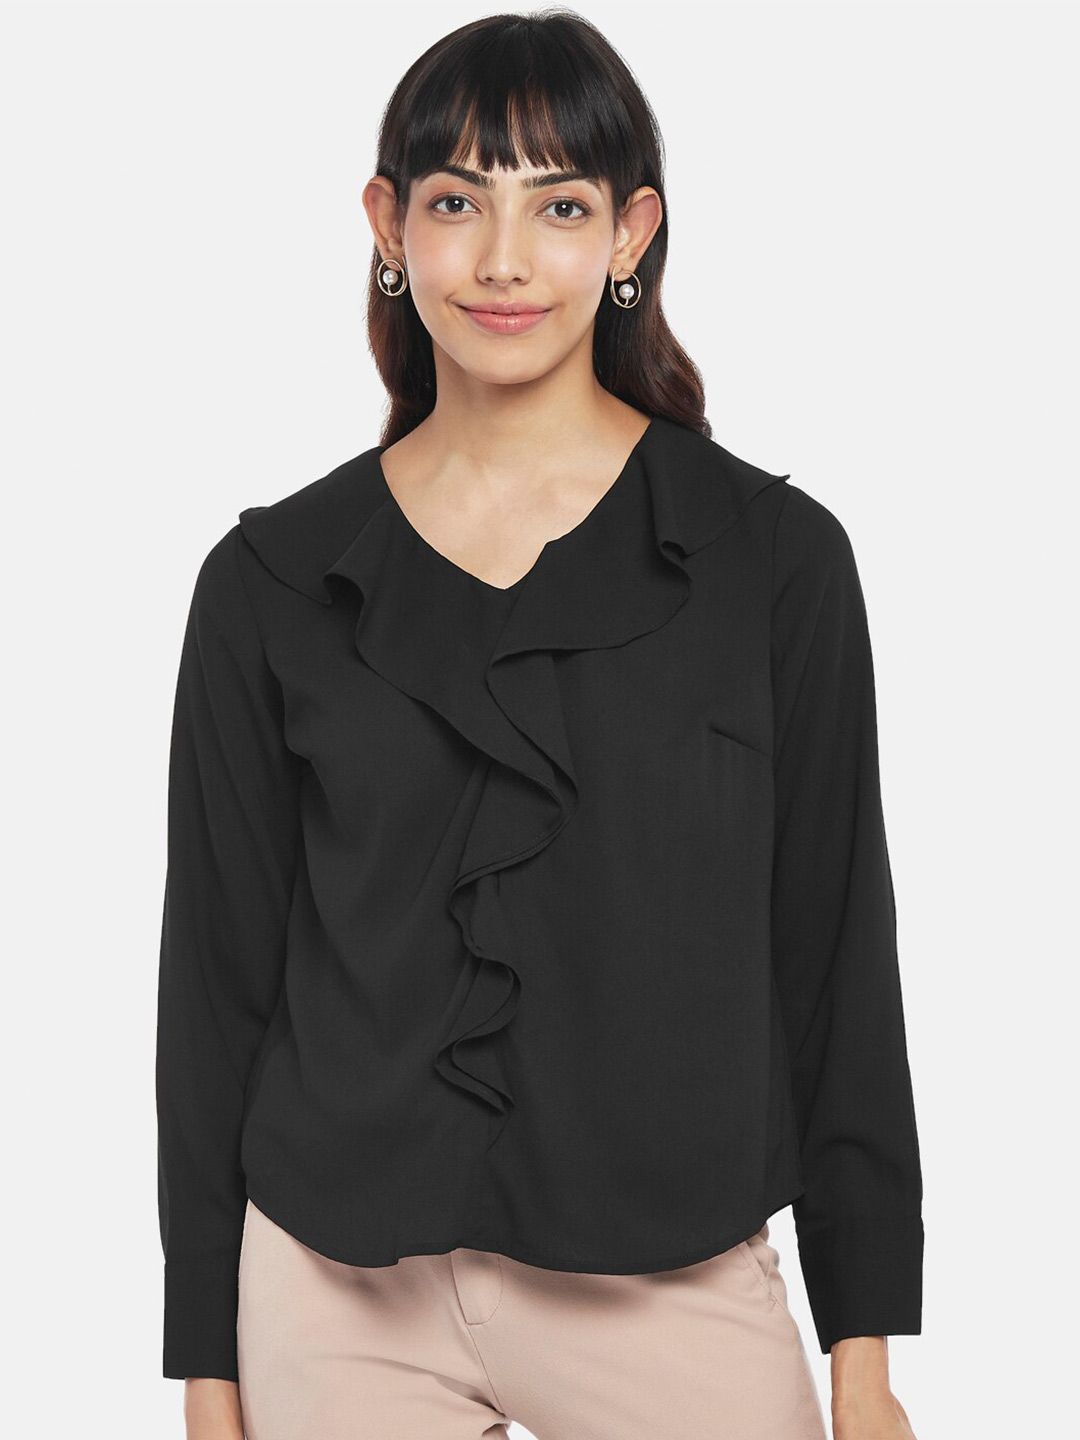 Annabelle by Pantaloons Black Solid Ruffles Top Price in India